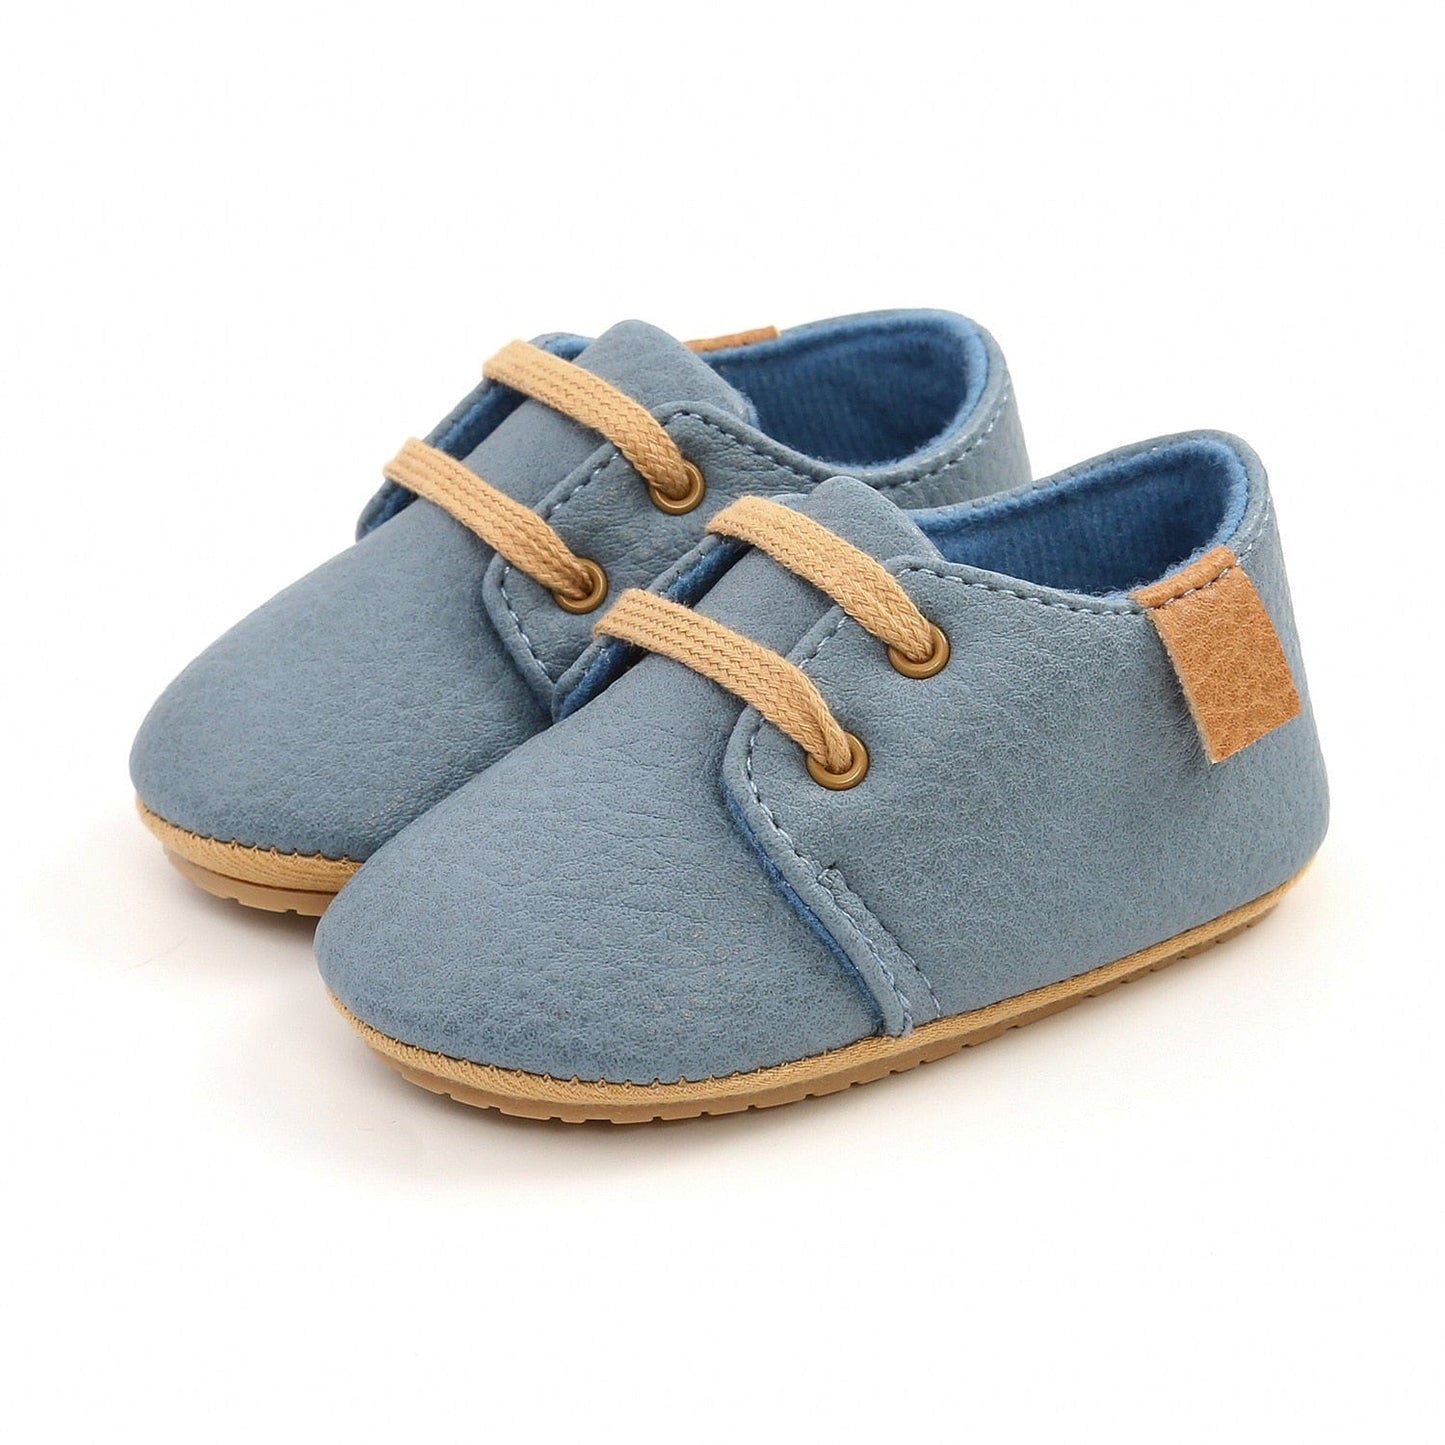 Proactive Baby Blue / 0-6 Months Copy of NewBaby Retro Leather Baby Shoes With Rubber Sole Best First Walkers For Newborn/Infant